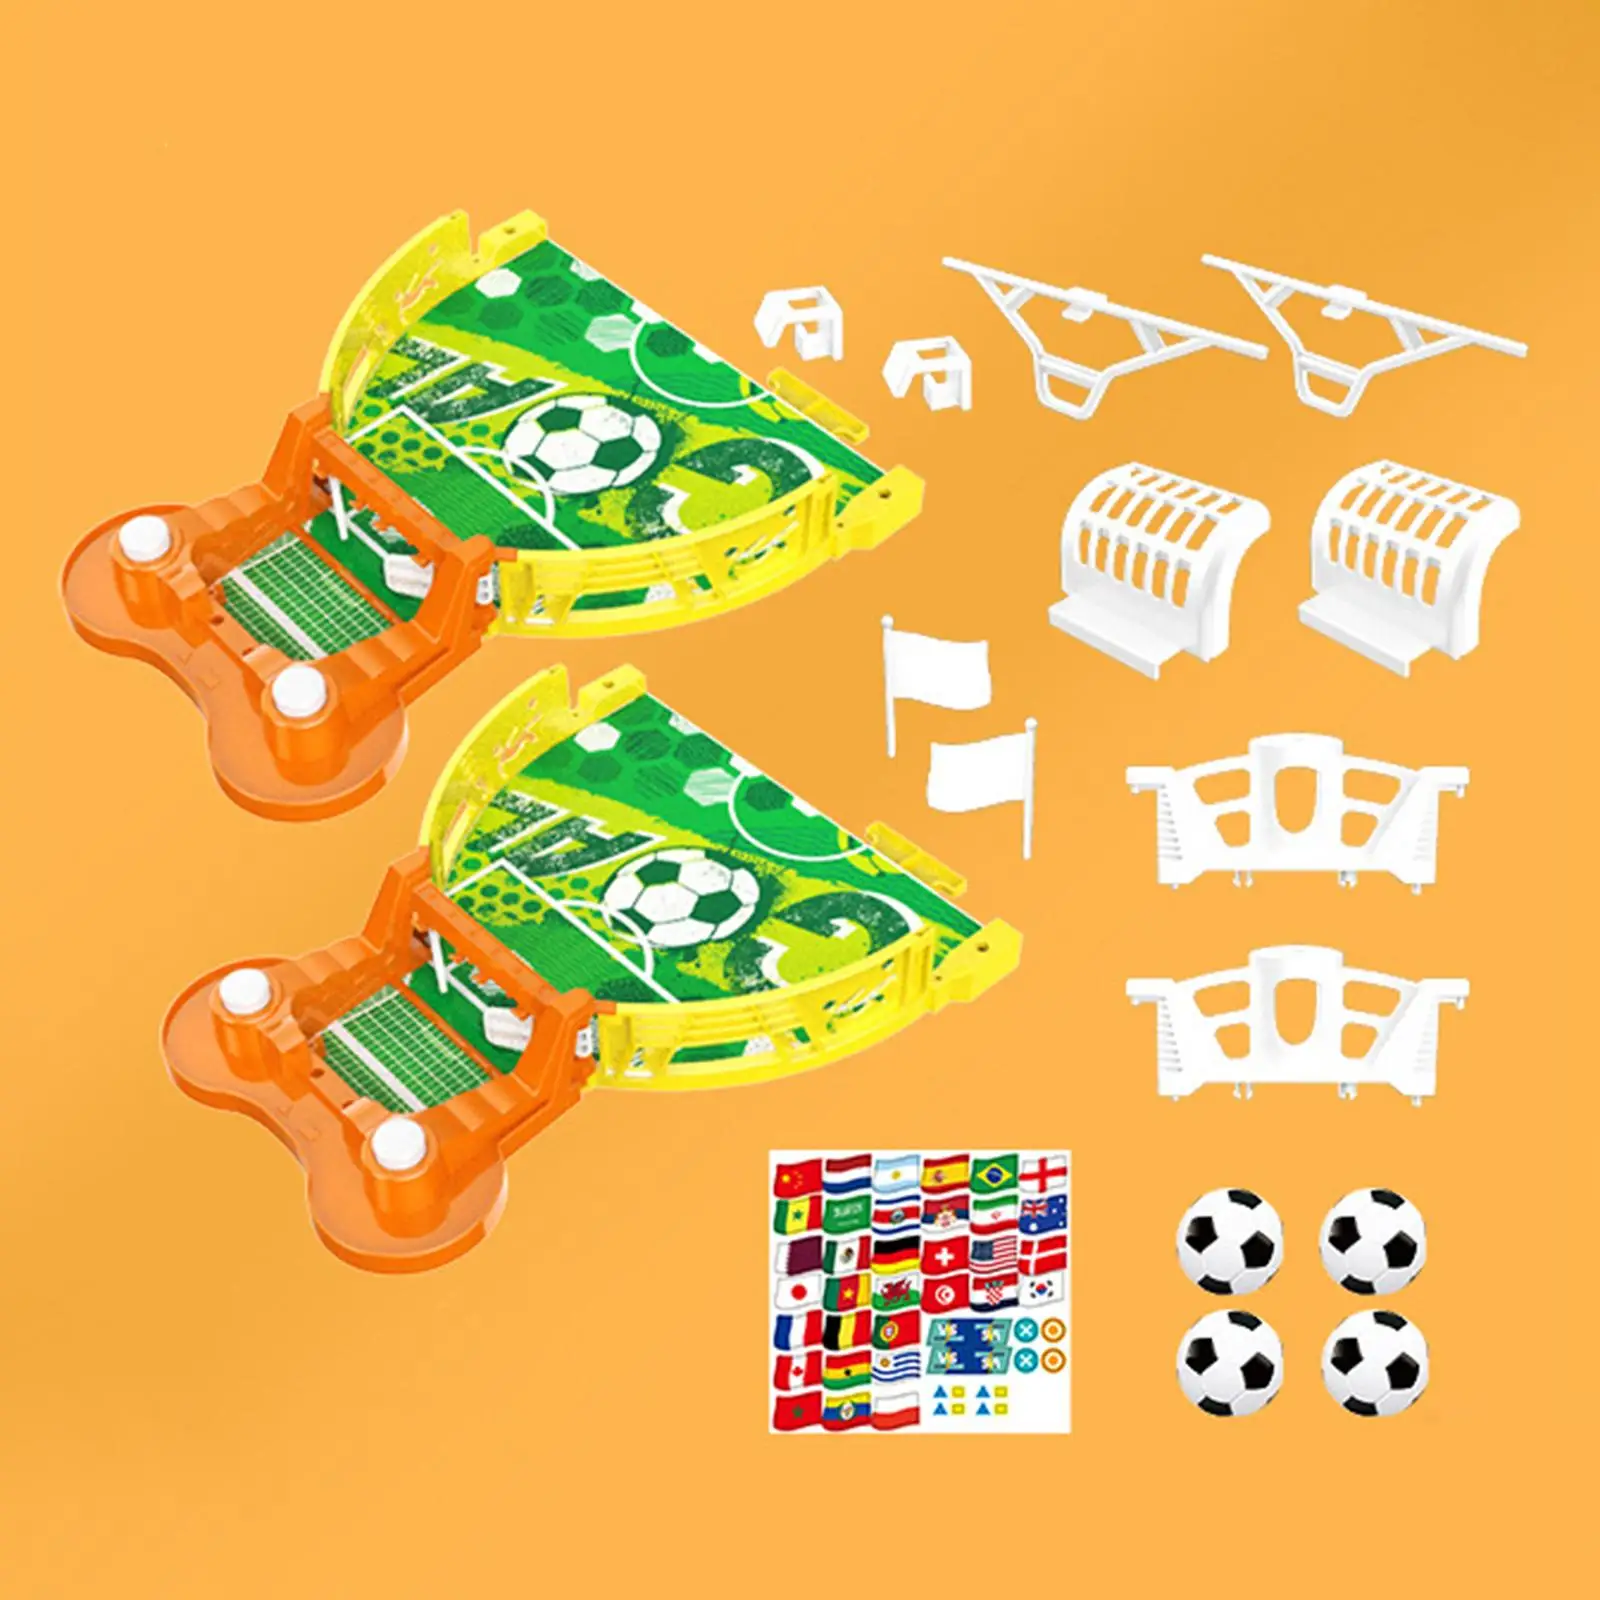 Mini Table Soccer Game Portable Desktop Toy Tabletop Football Game Toy for Entertainment Kids Adults Children Family Boys Girls